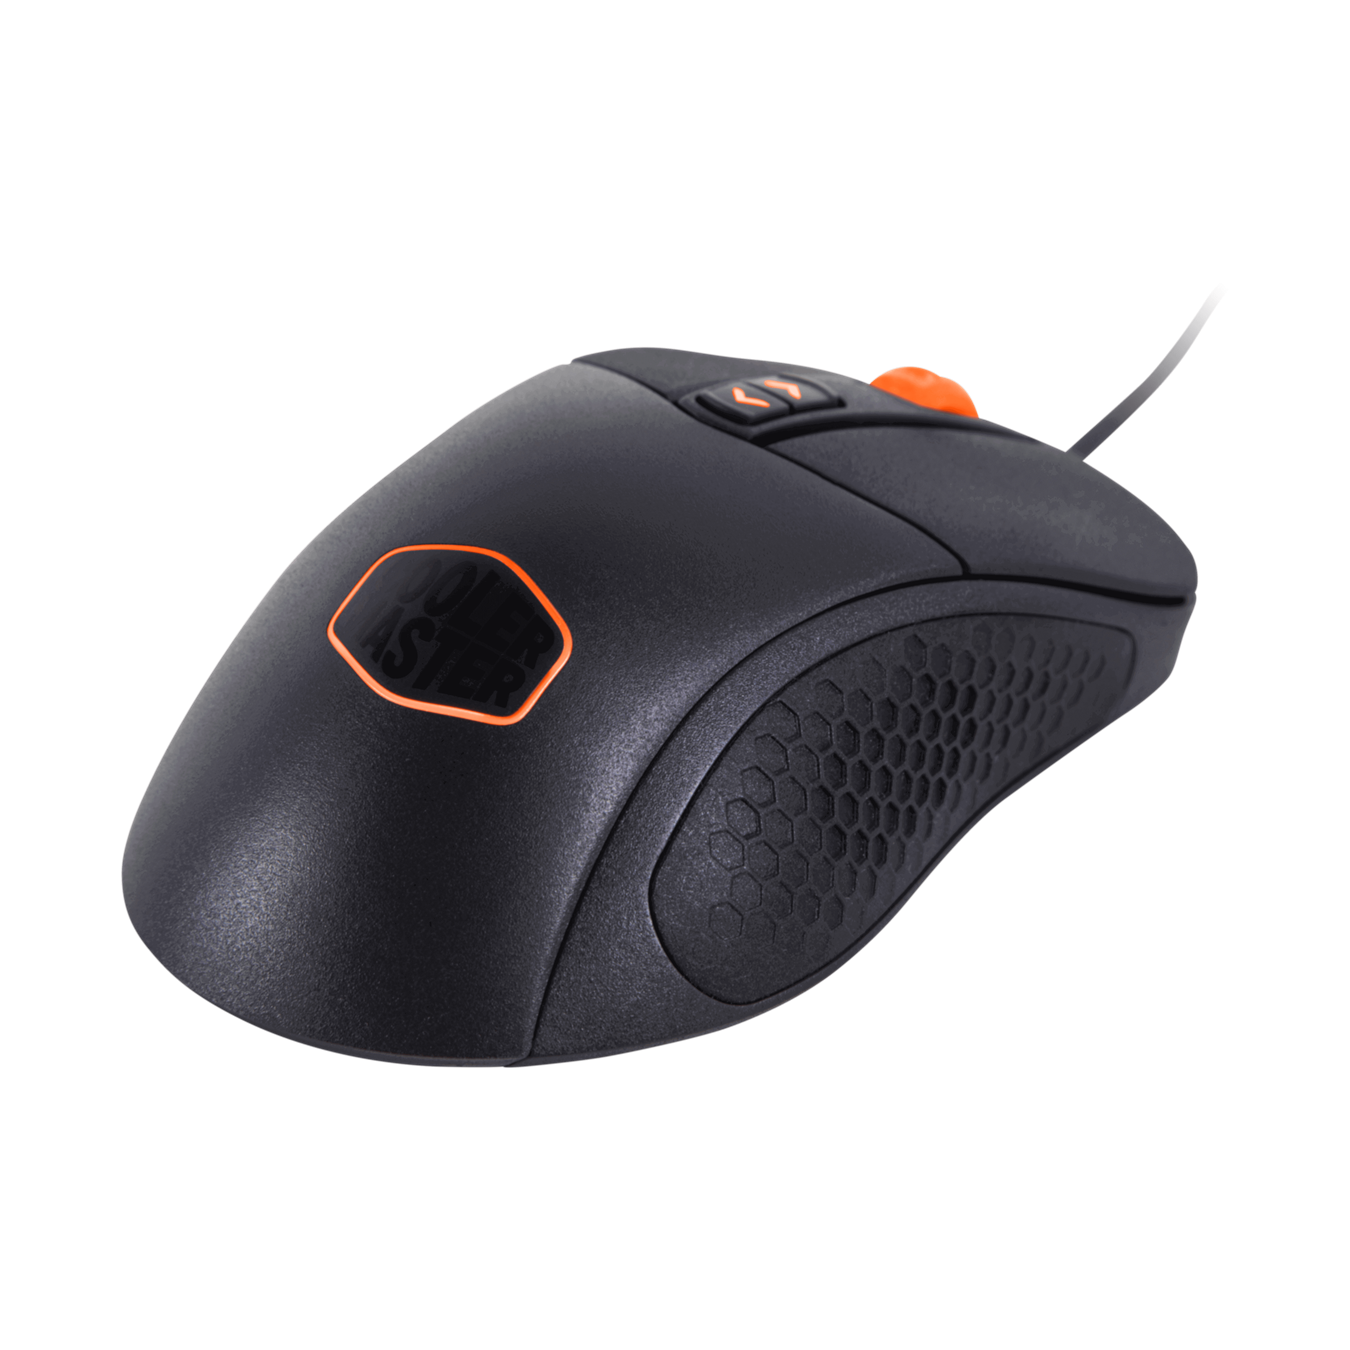 MasterMouse MM530 Gaming Mouse - 7 Buttons that can be programmed for alternate functions or macro's.